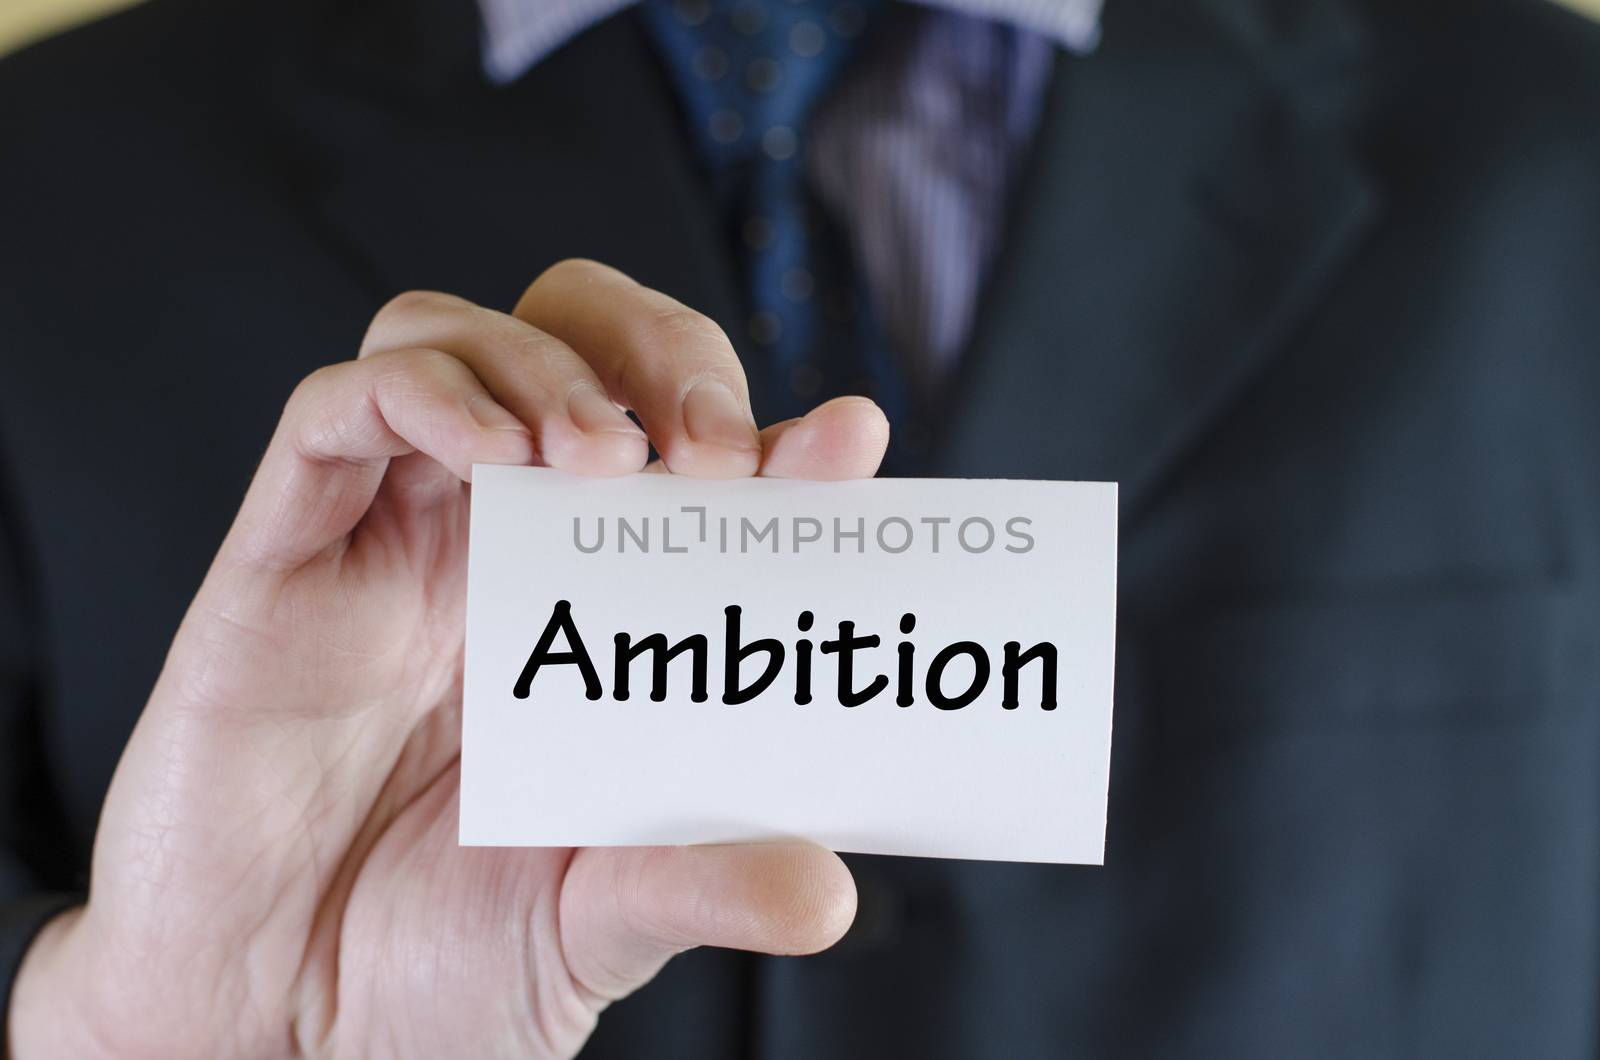 Ambition text note concept over business man background